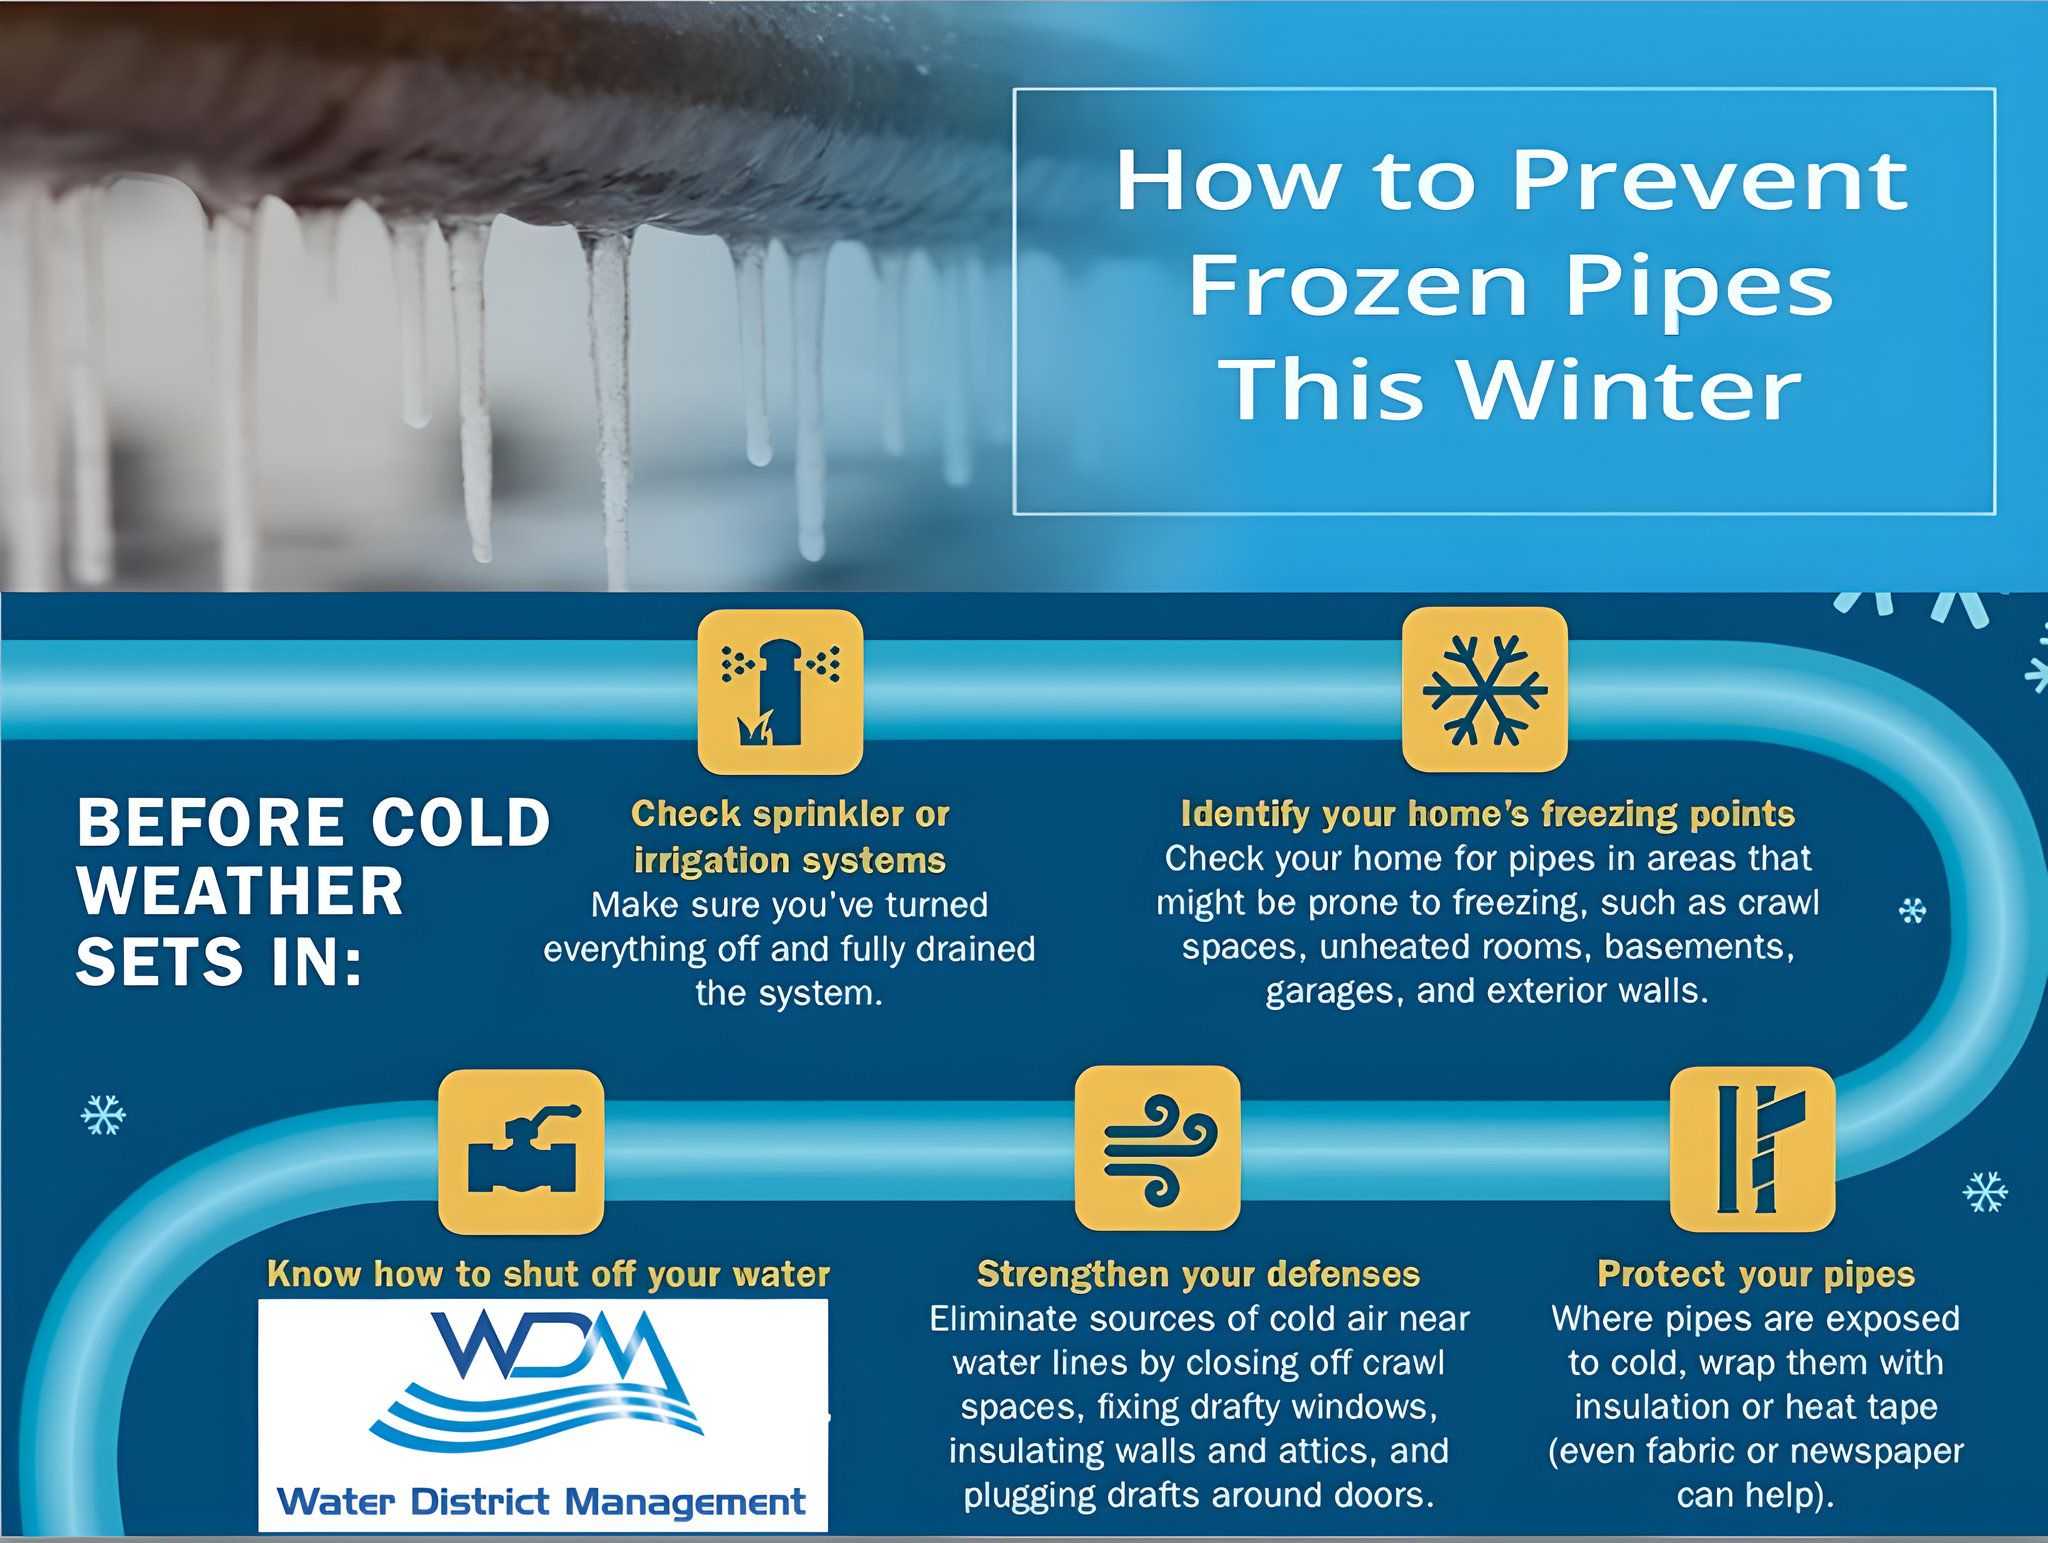 6 Tips to Prevent Frozen Pipes and Costly Repairs This Winter - CNET